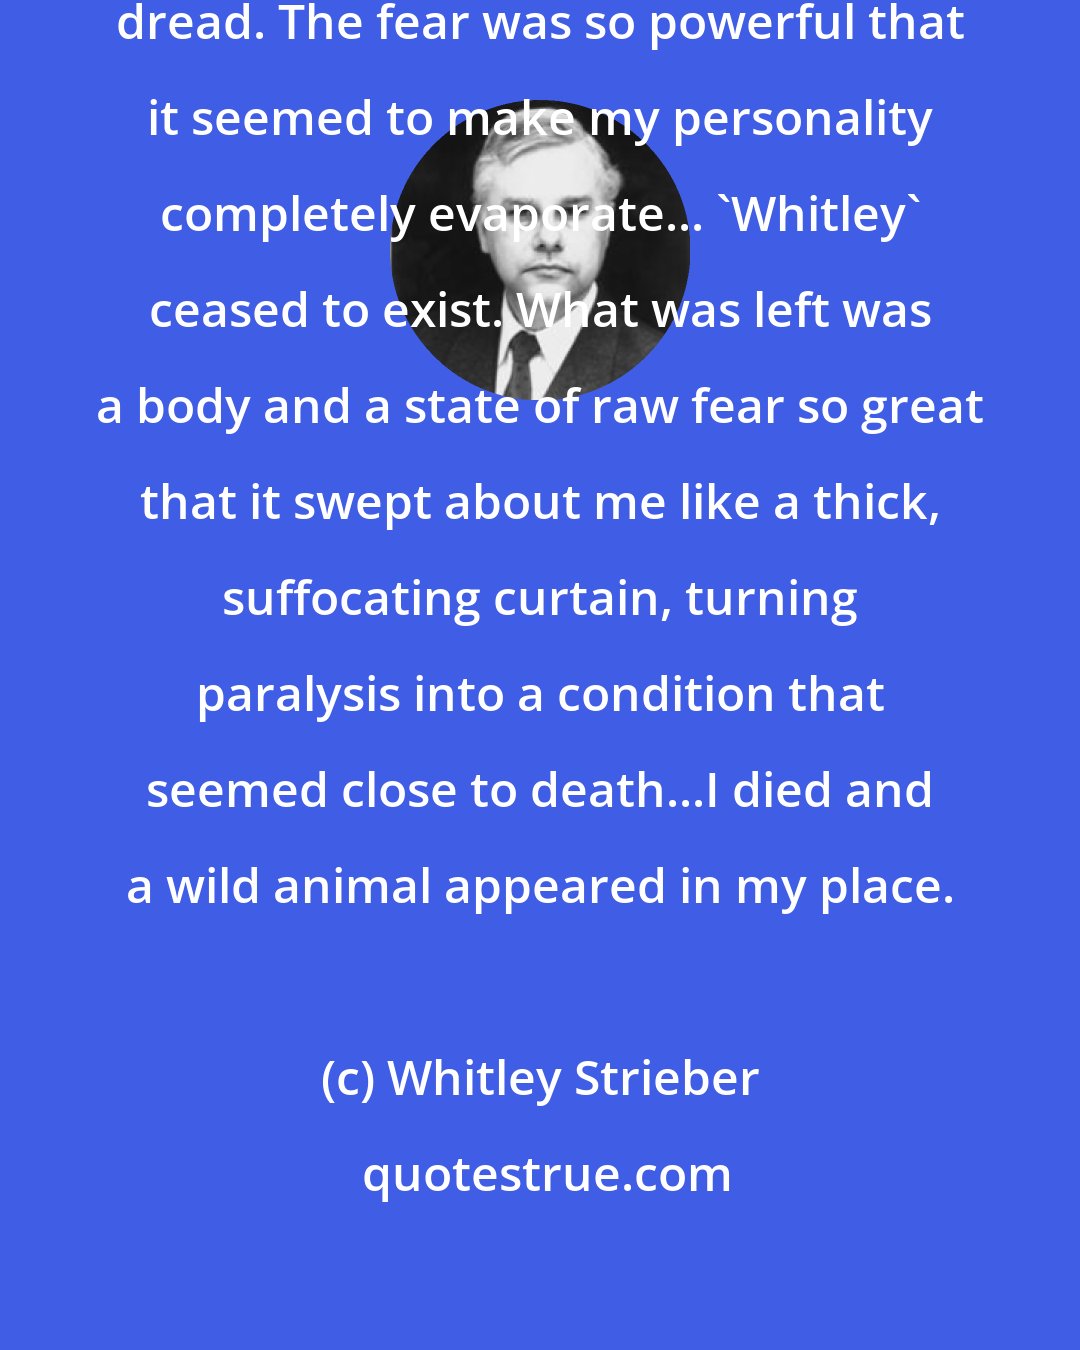 Whitley Strieber: I became entirely given over to extreme dread. The fear was so powerful that it seemed to make my personality completely evaporate... 'Whitley' ceased to exist. What was left was a body and a state of raw fear so great that it swept about me like a thick, suffocating curtain, turning paralysis into a condition that seemed close to death...I died and a wild animal appeared in my place.